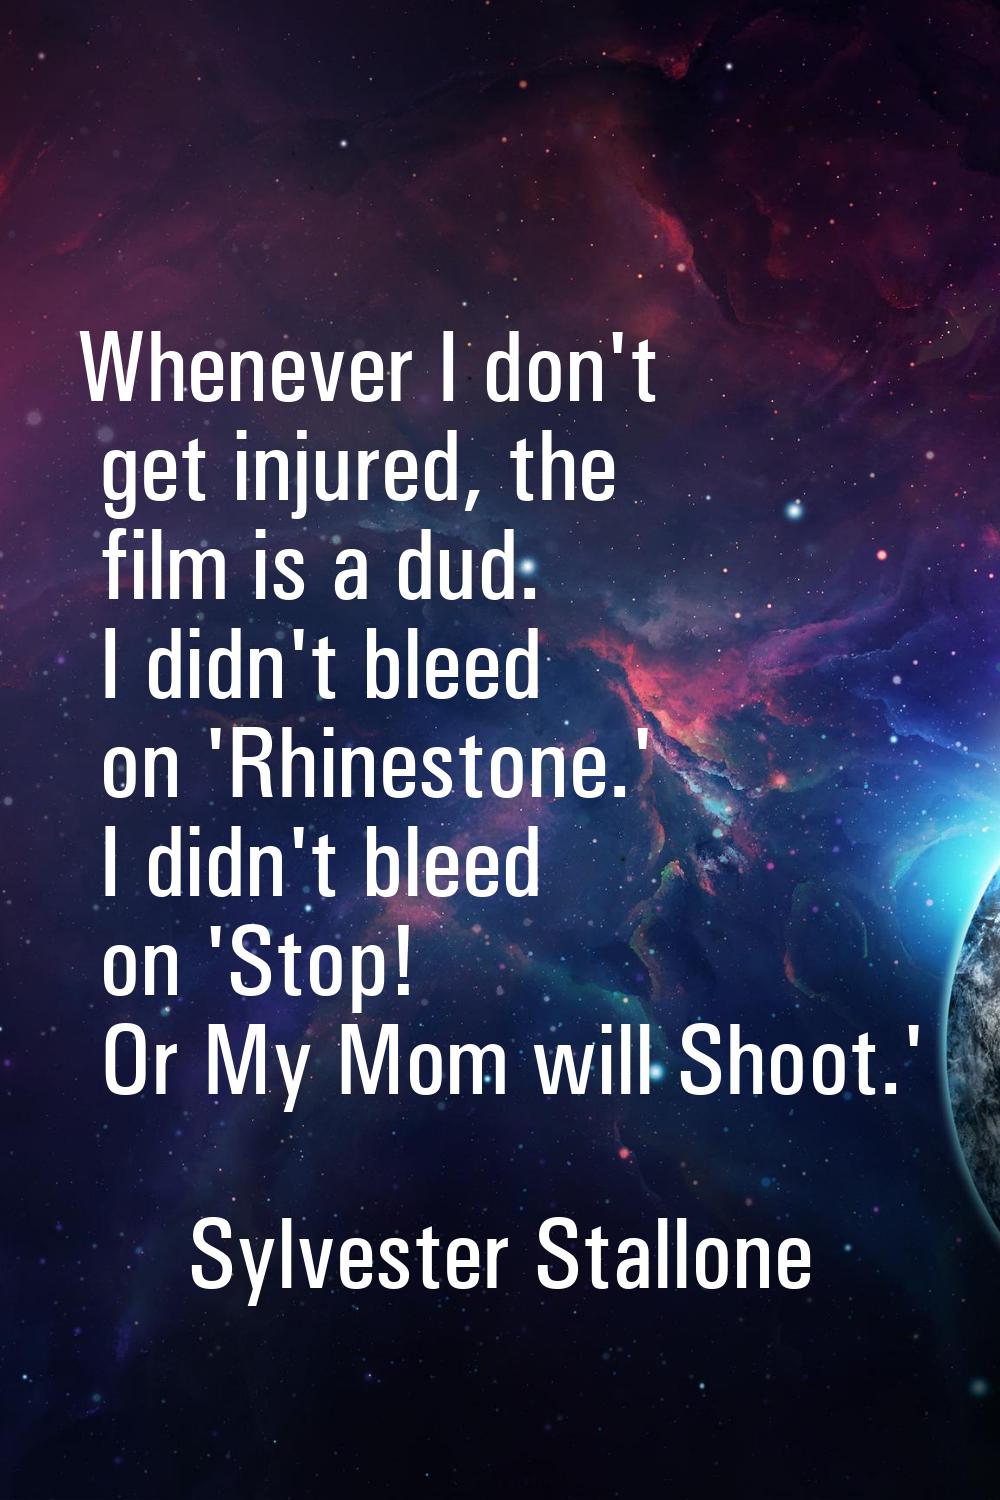 Whenever I don't get injured, the film is a dud. I didn't bleed on 'Rhinestone.' I didn't bleed on 